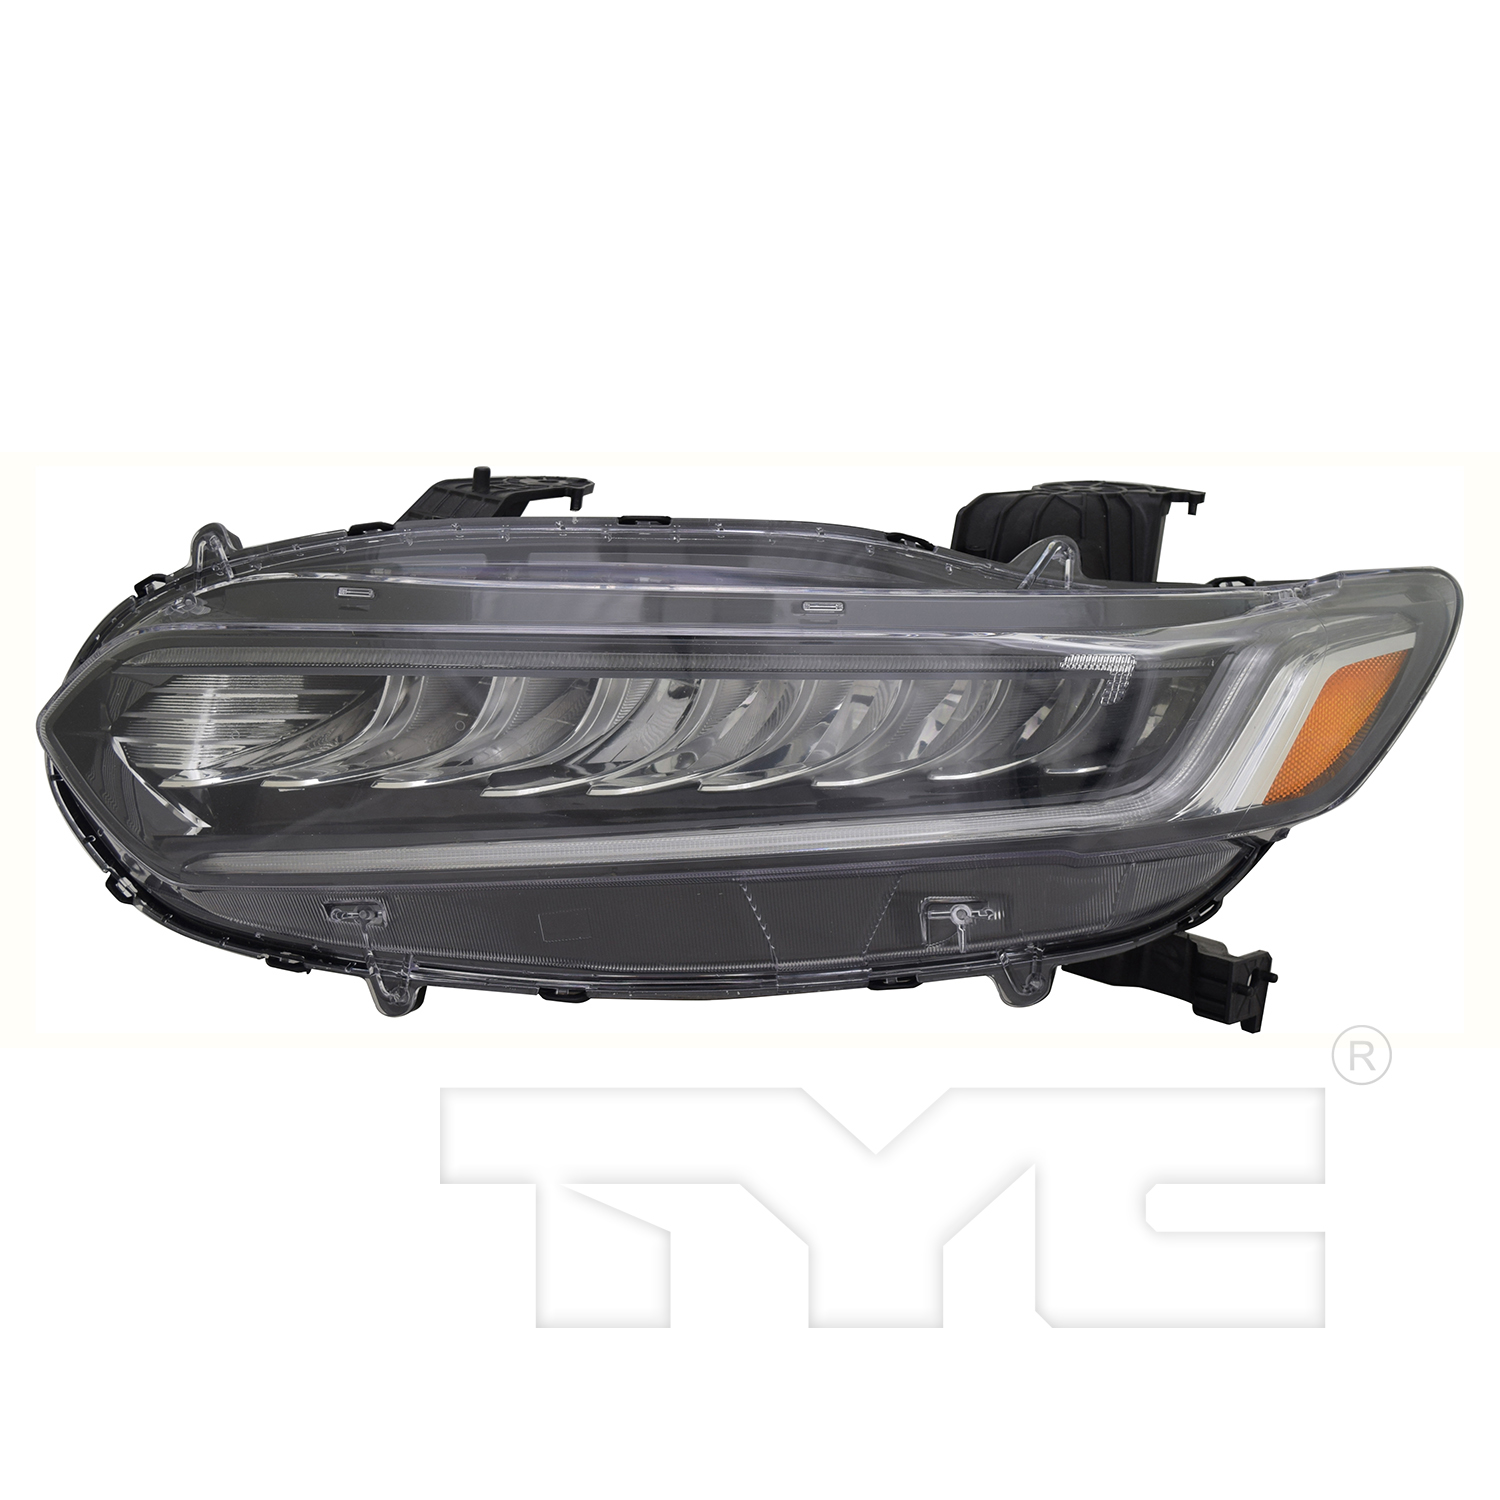 Aftermarket HEADLIGHTS for HONDA - ACCORD, ACCORD,18-20,LT Headlamp assy composite